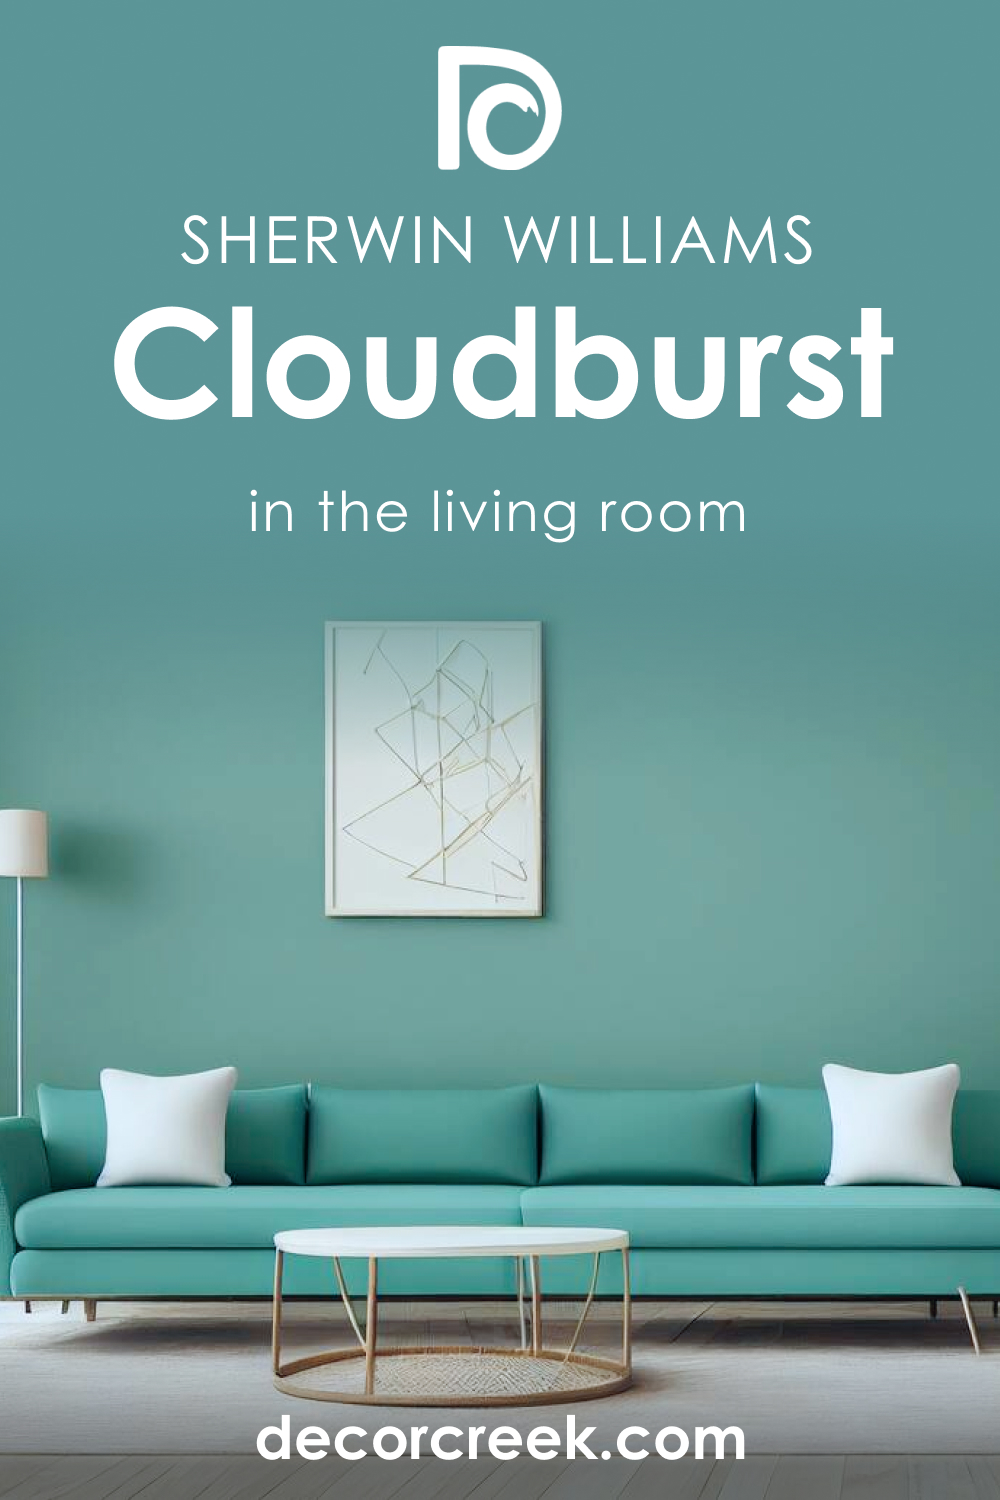 How to Use SW 6487 Cloudburst in the Living Room?